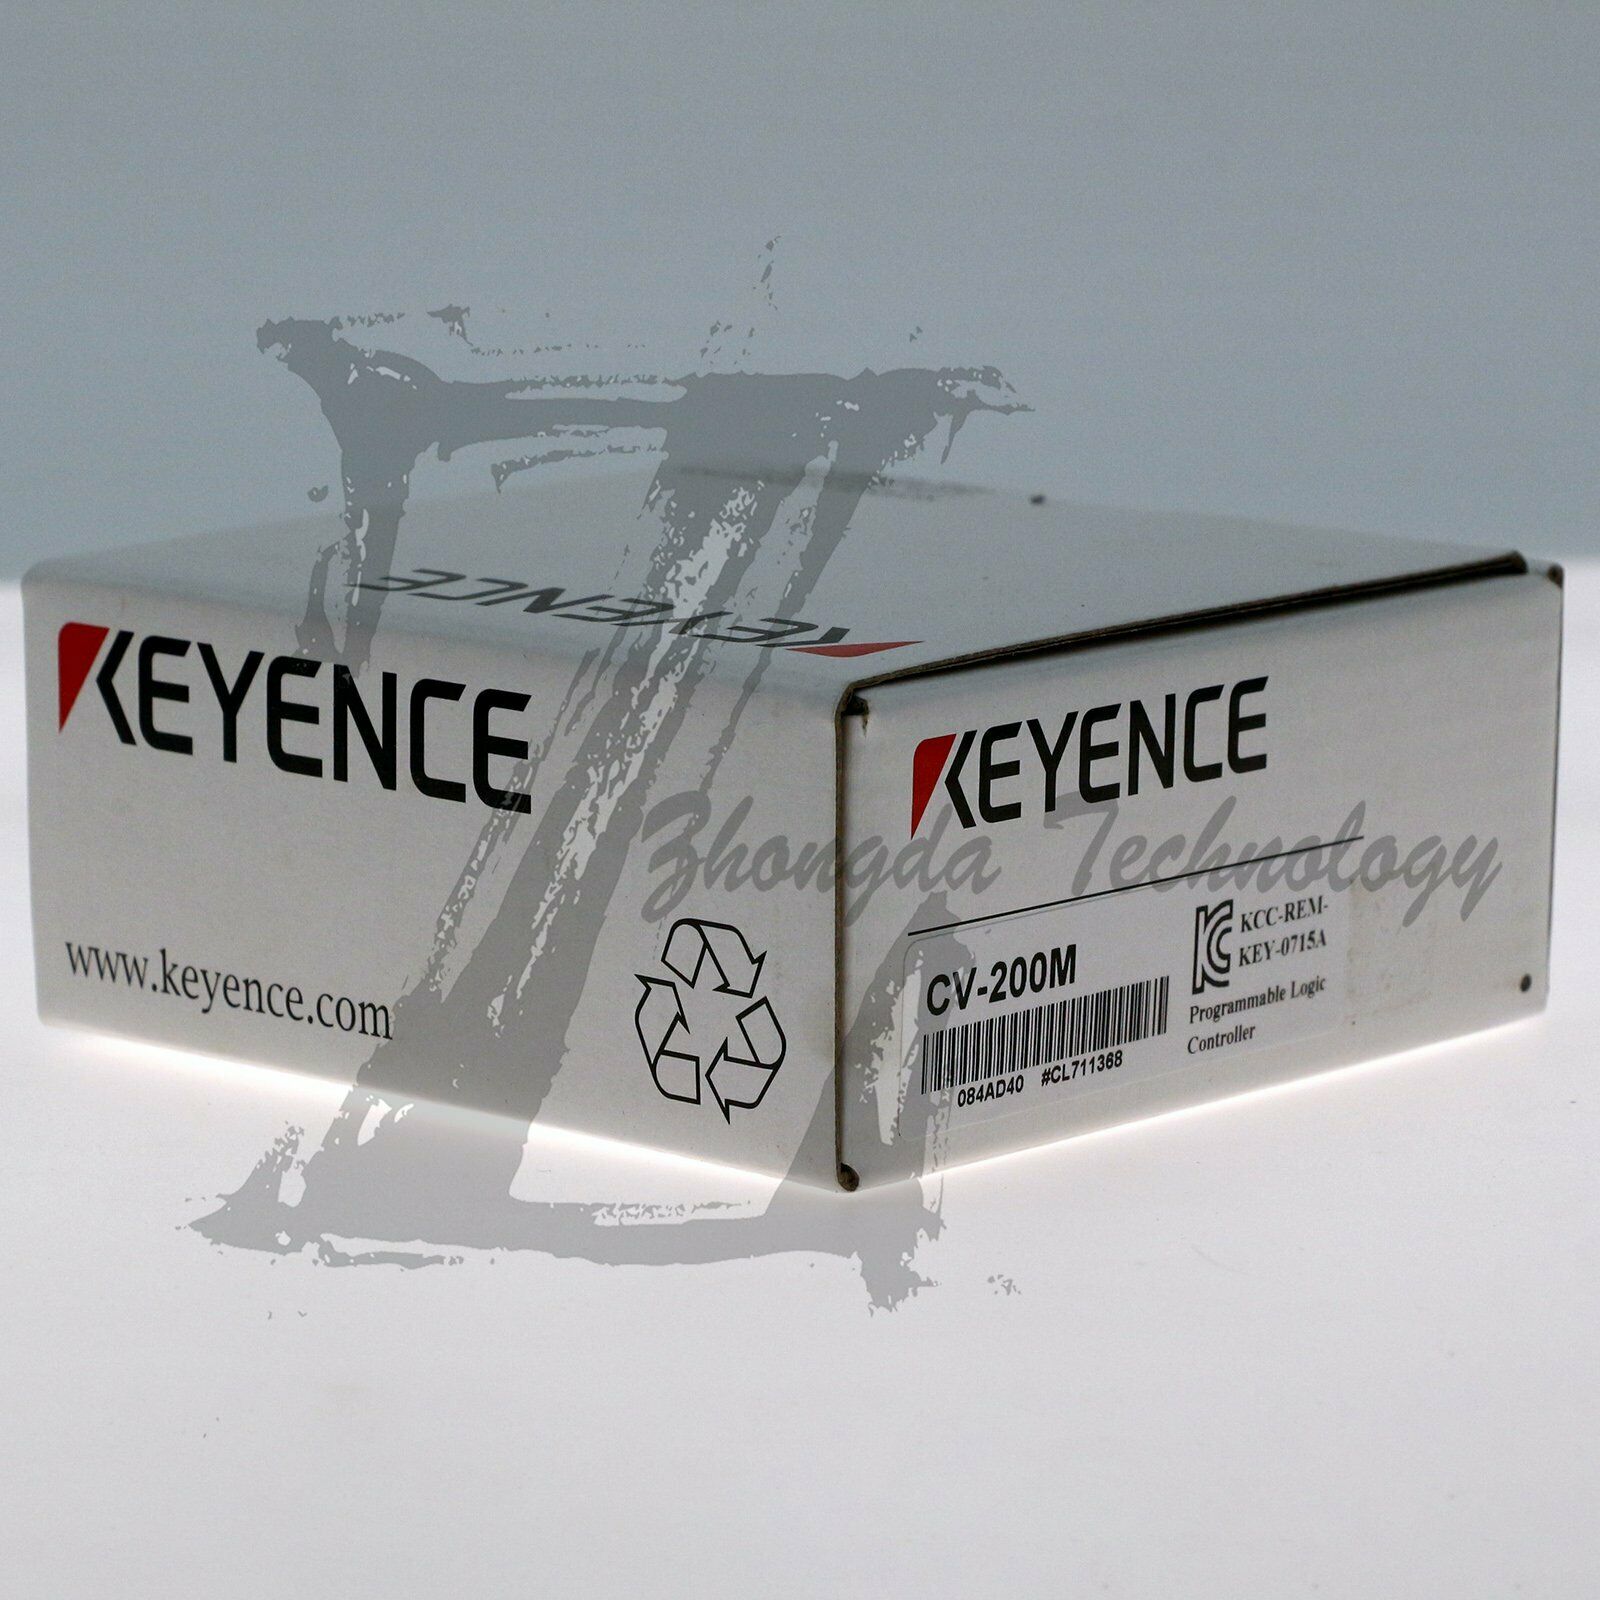 1PC Brand NEW IN BOX Keyence CV-200M  One year warranty KOEED 500+, 80%, import_2020_10_10_031751, KEYENCE, Other, validate-product-description